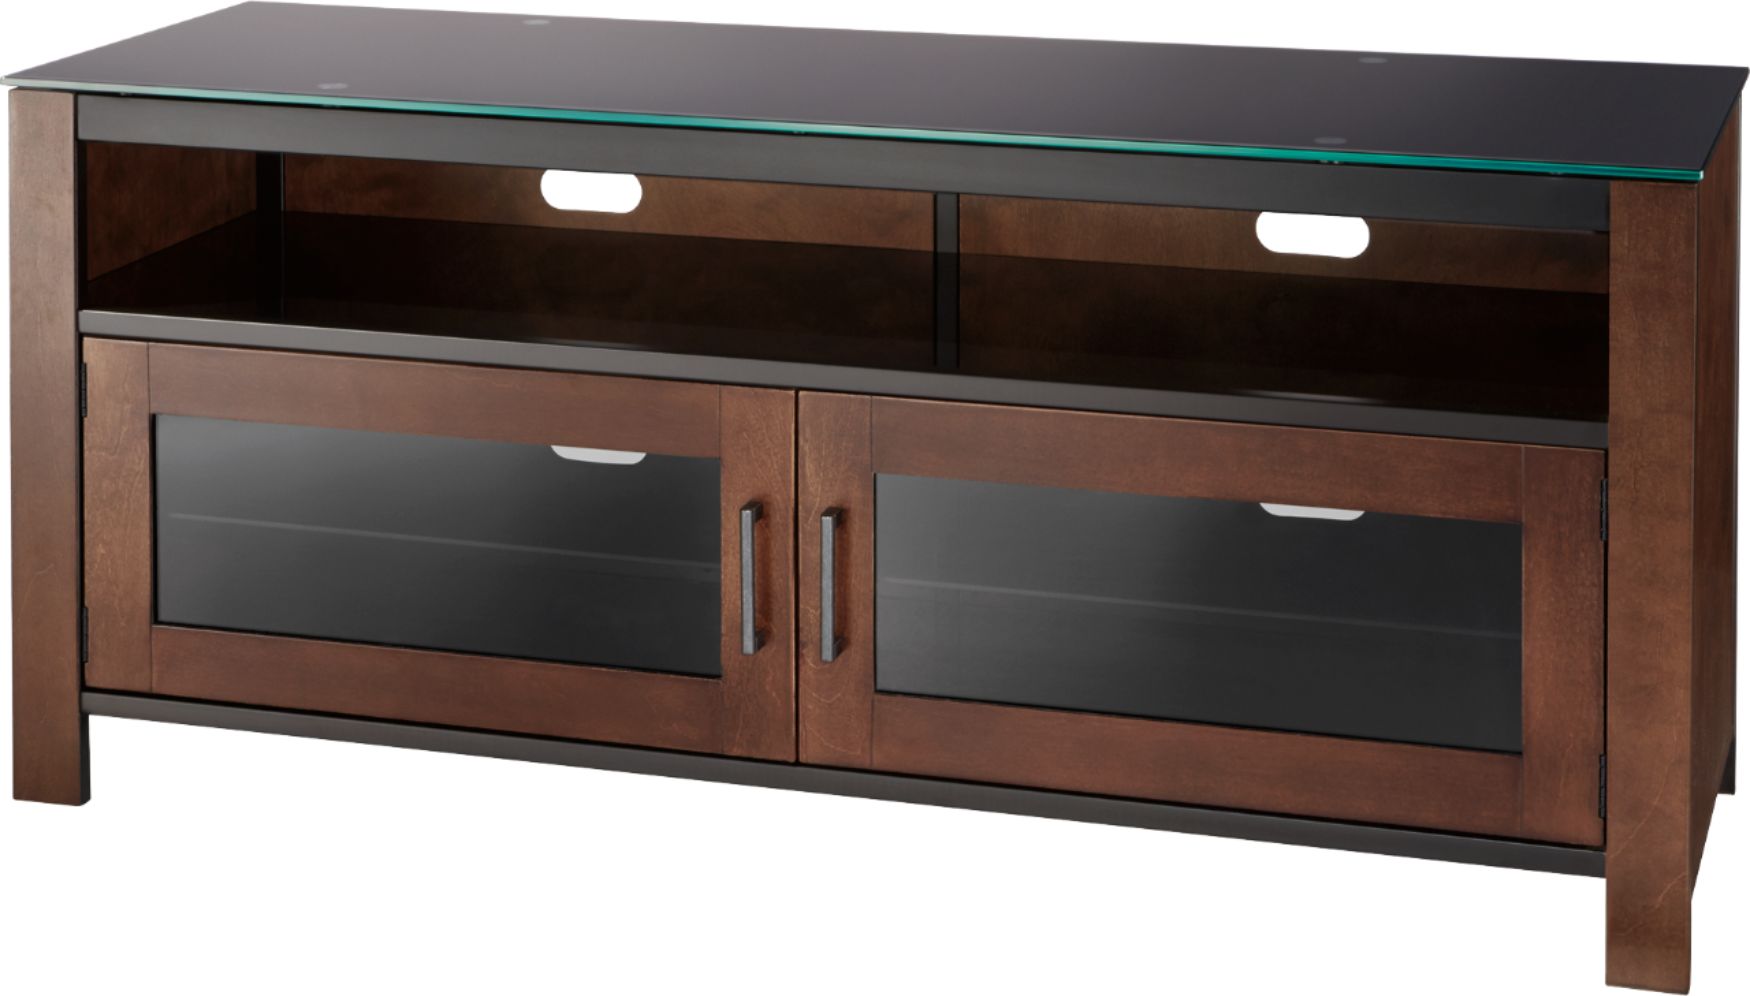 Insignia- TV Stand for Most Flat-Panel TVs Up to 60 - Mocha